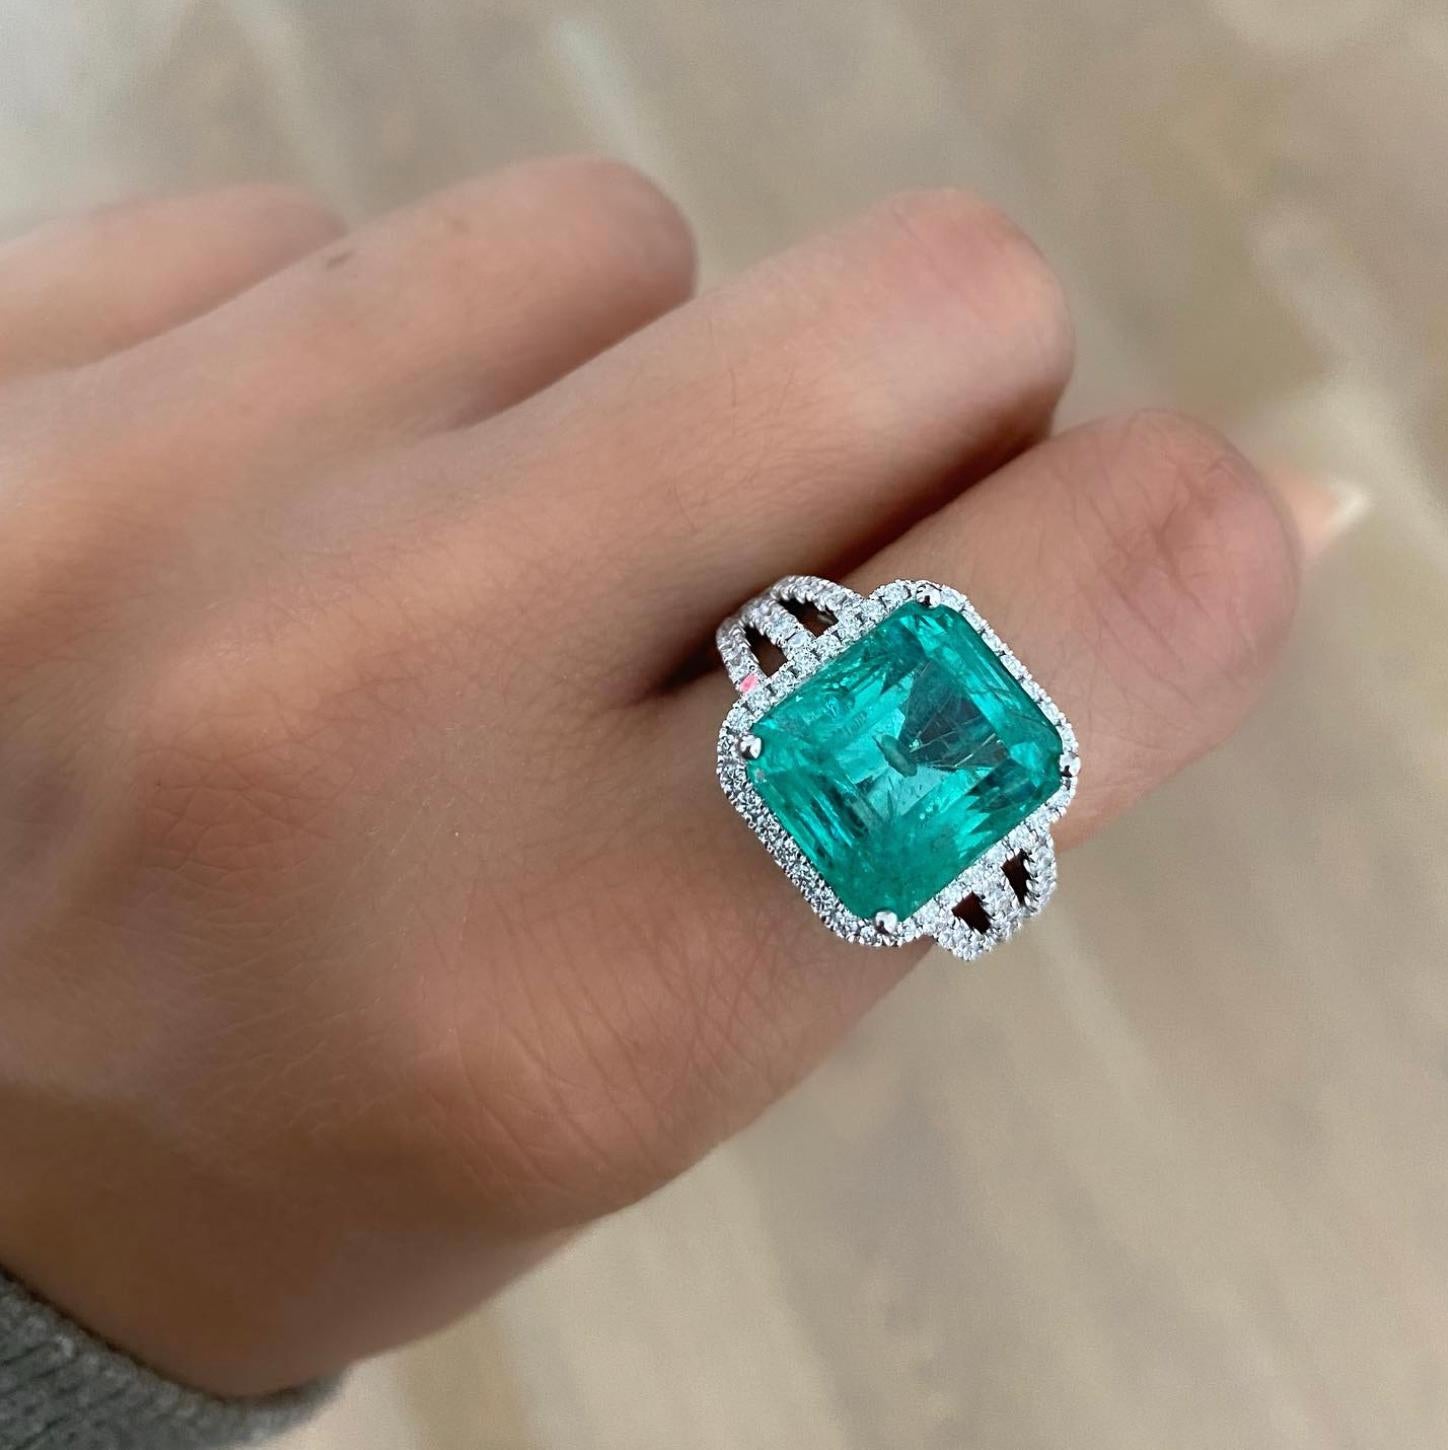 Make a statement with this significant Emerald of almost 10 cts featured in a trinity style brilliant cut diamond ring. Renowned for our one-of-a-kind precious gemstone collection, this ring is the star of our holiday collection!  Wear it as a